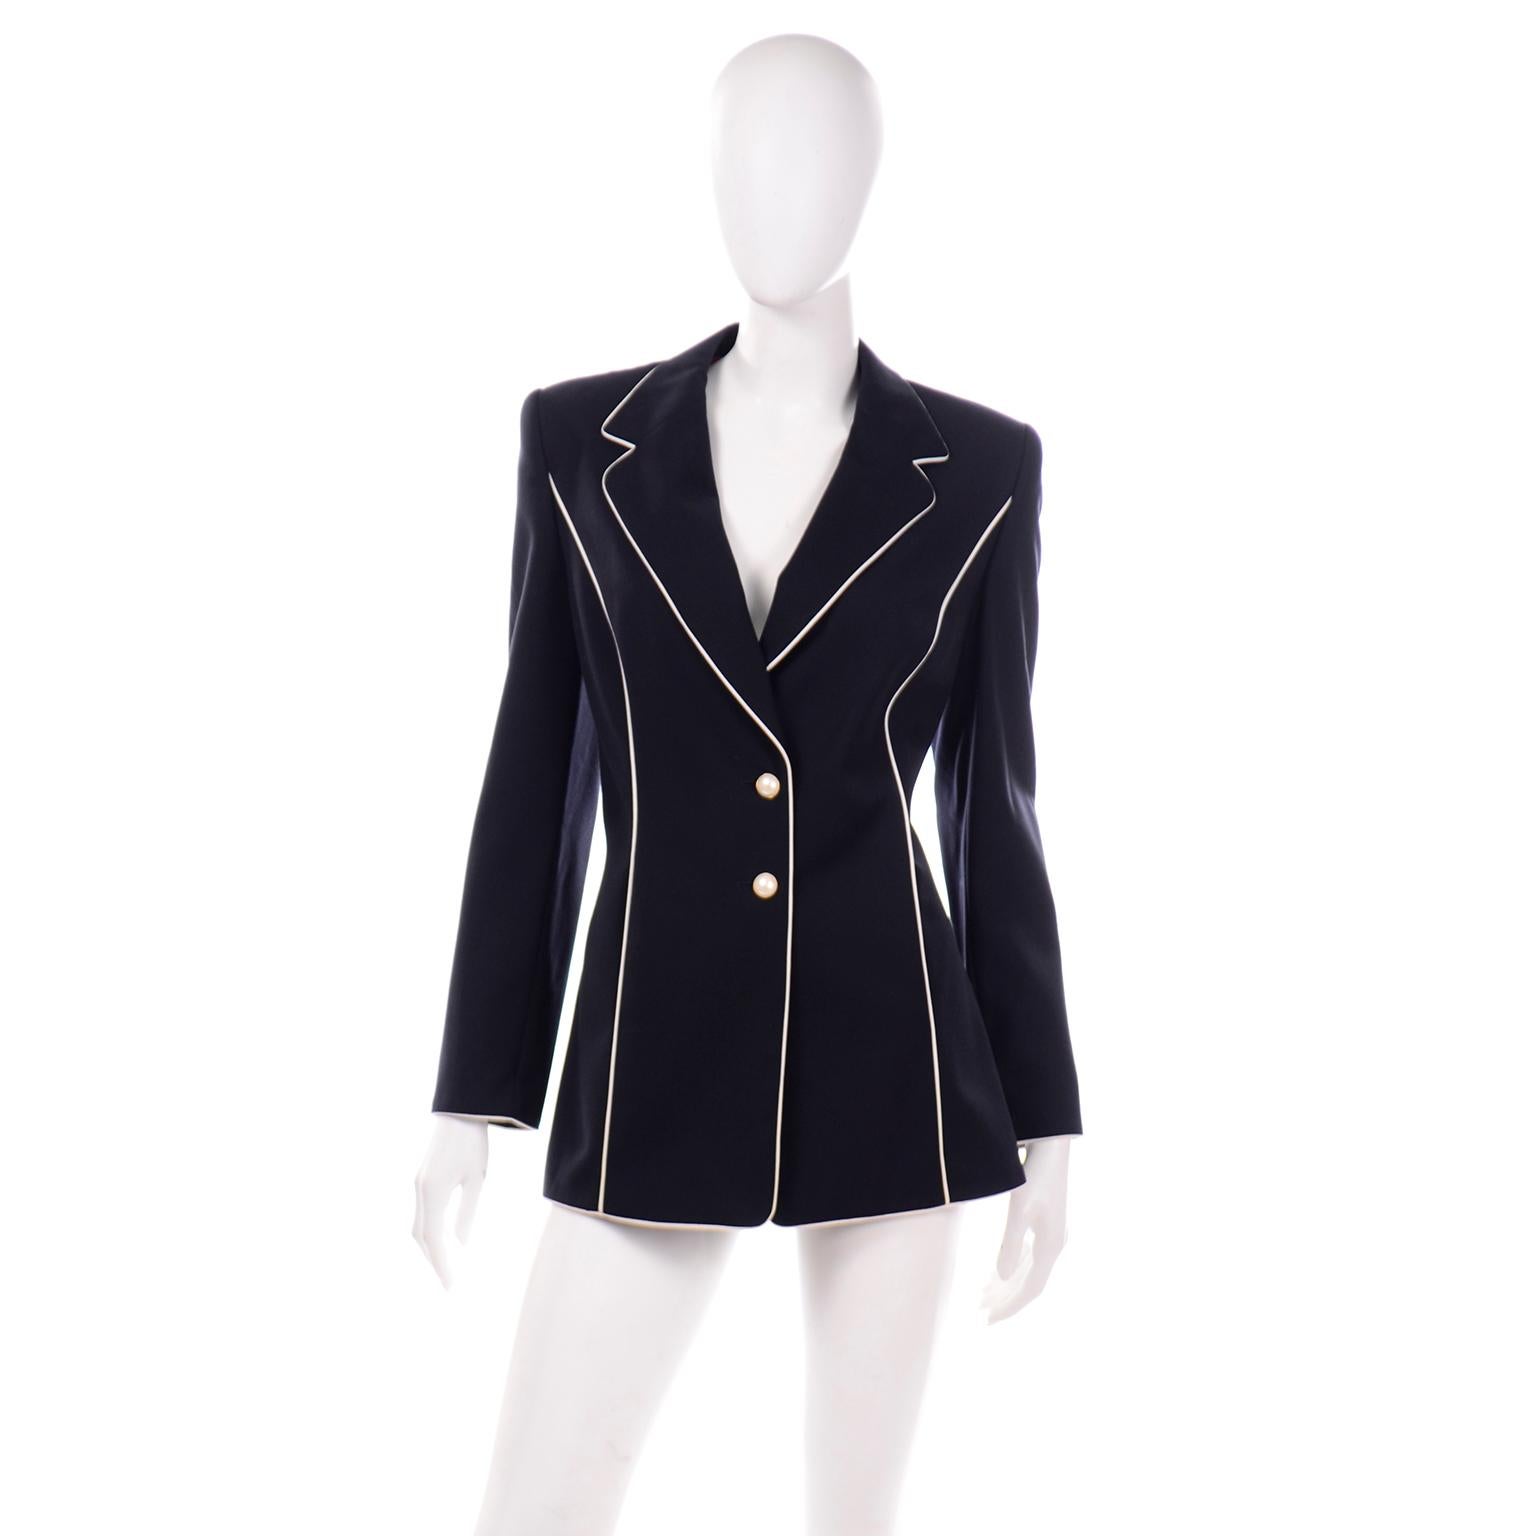 We love vintage Escada and this great vintage 1990's jacket could be a staple in any modern wardrobe! The blazer style jacket has beautiful white piping that contrasts so nicely with the dark, midnight blue (almost black) fabric. The piping trims